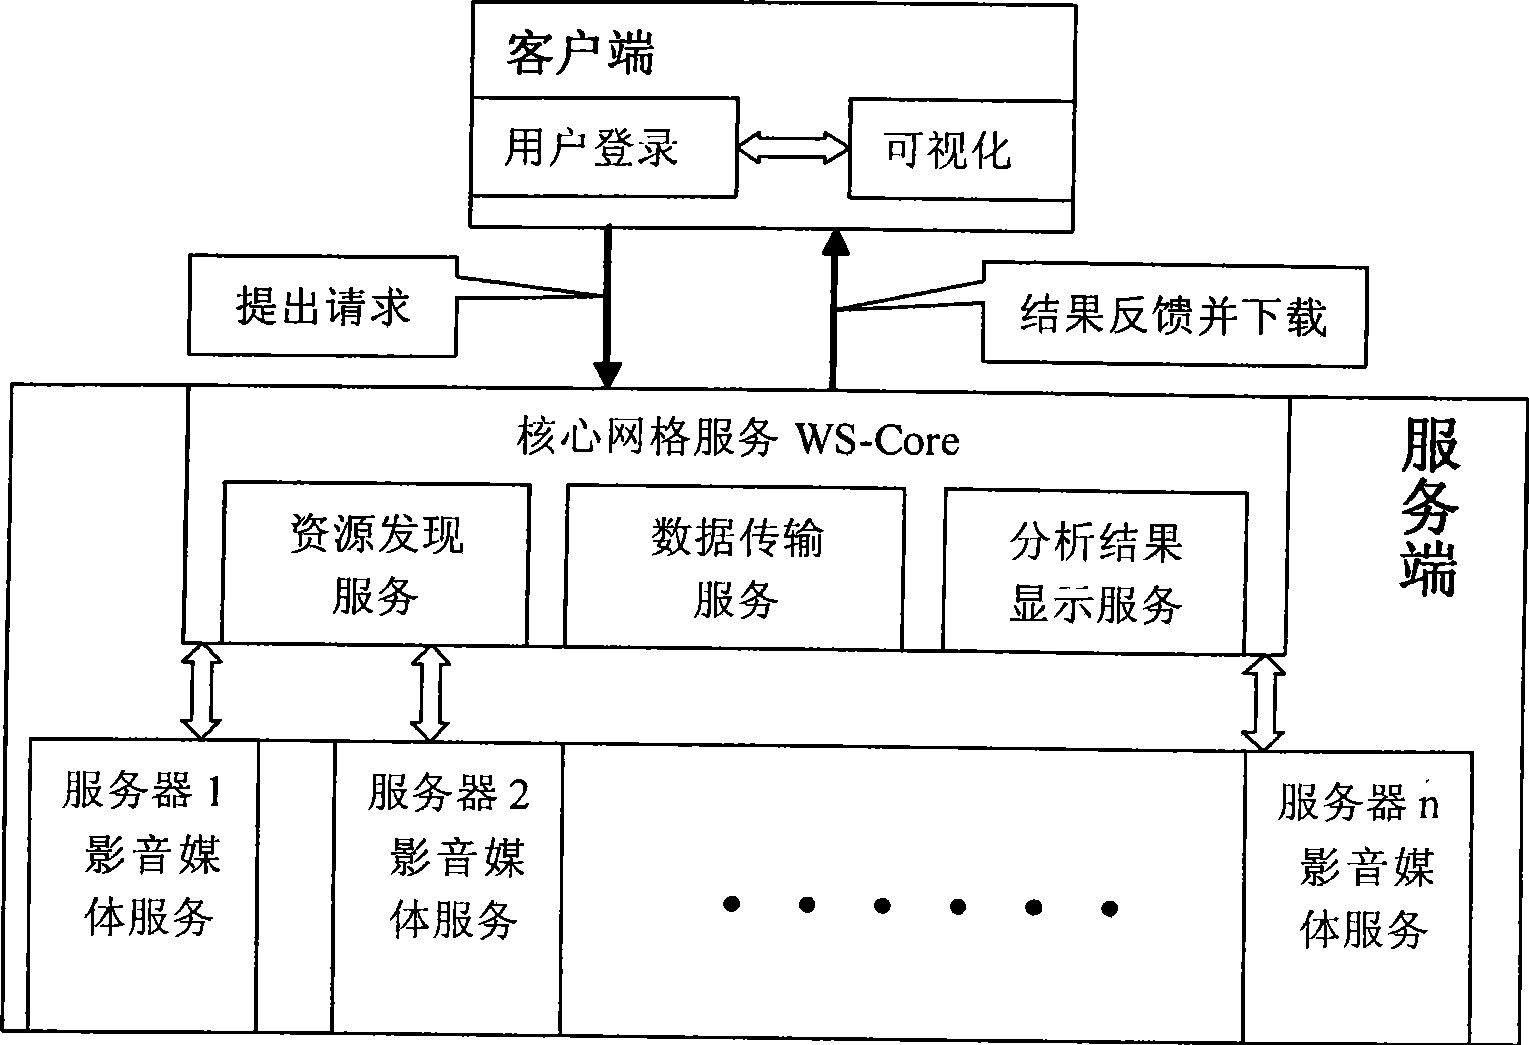 Method for playing and enquiring mobile communication terminal image and sound based on mobile grid